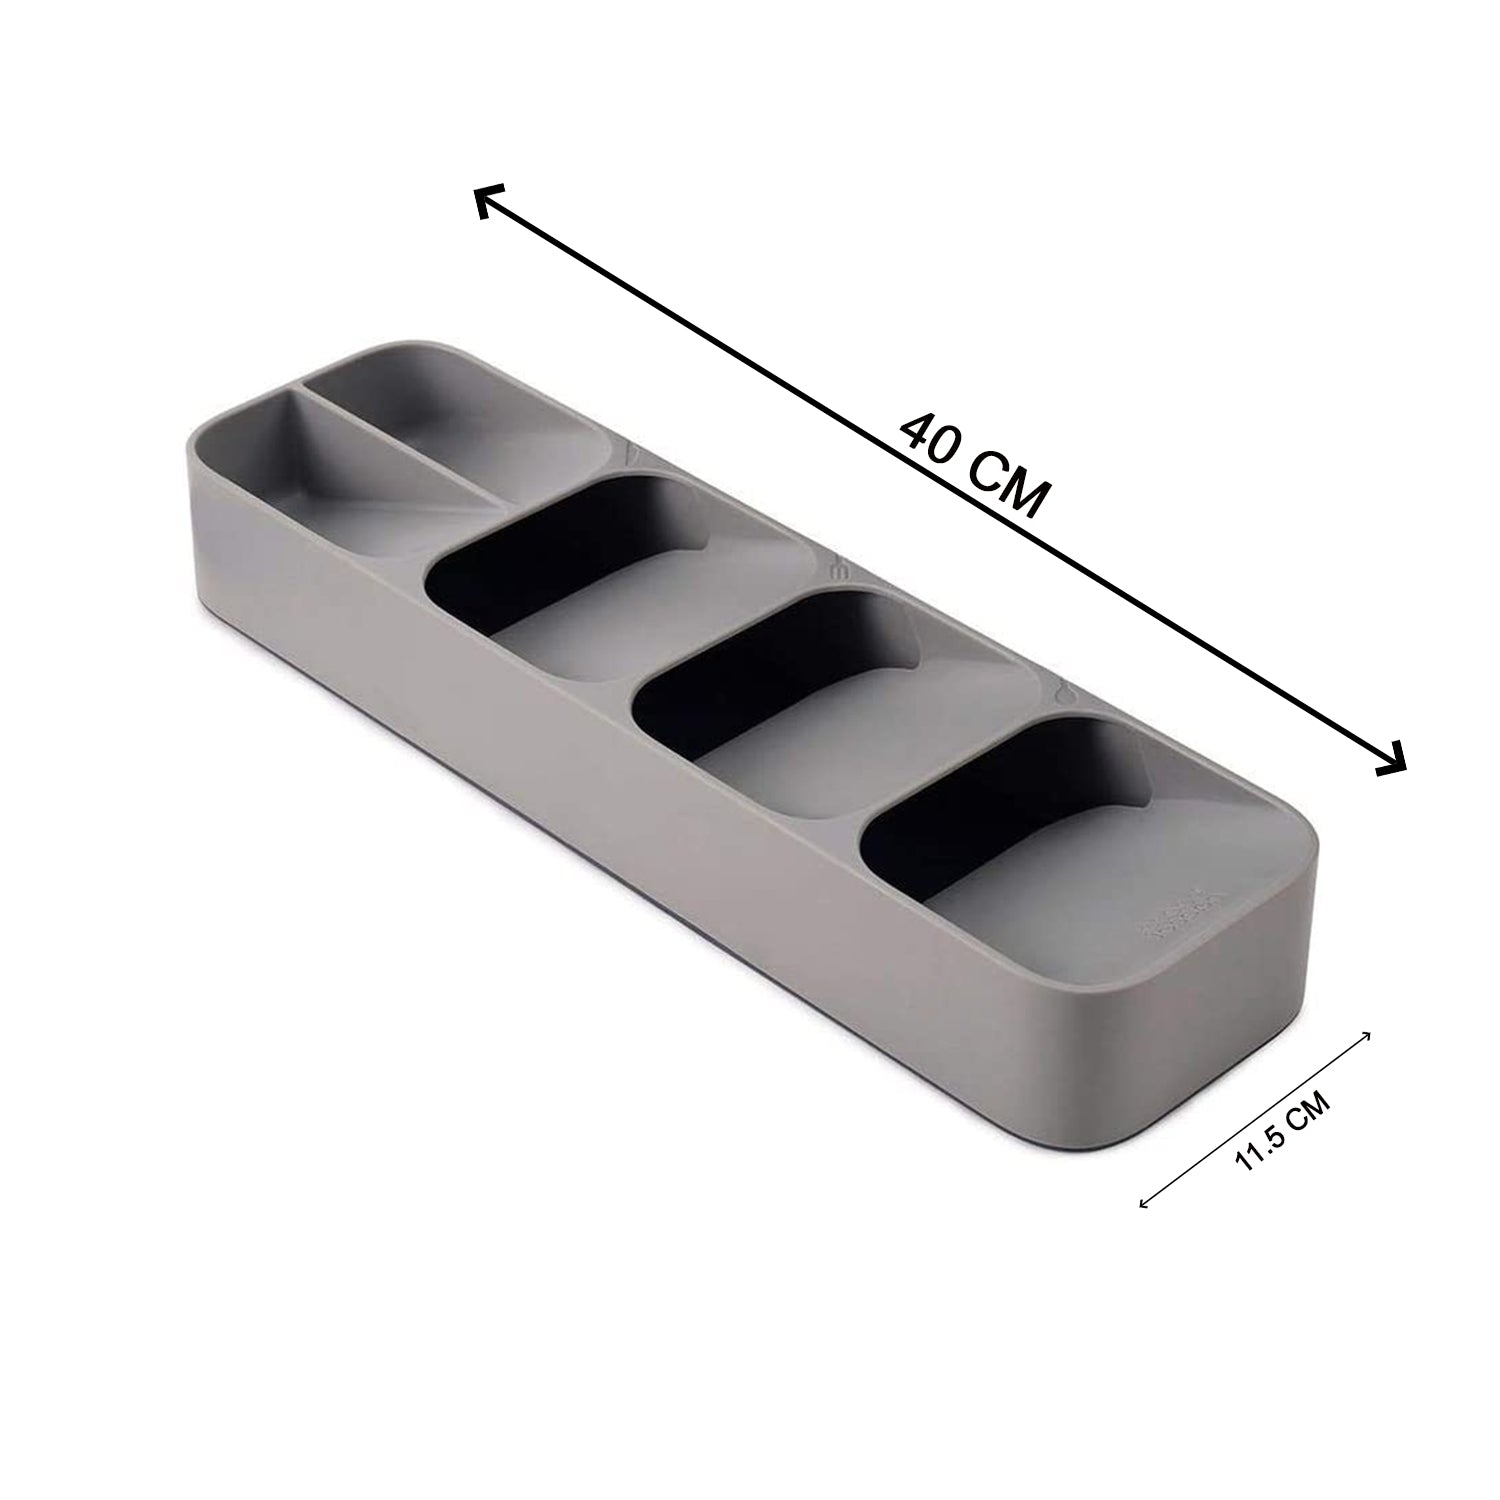 2762 1 Pc Cutlery Tray Box Used For Storing Cutlery Items And Stuffs Easily And Safely. DeoDap